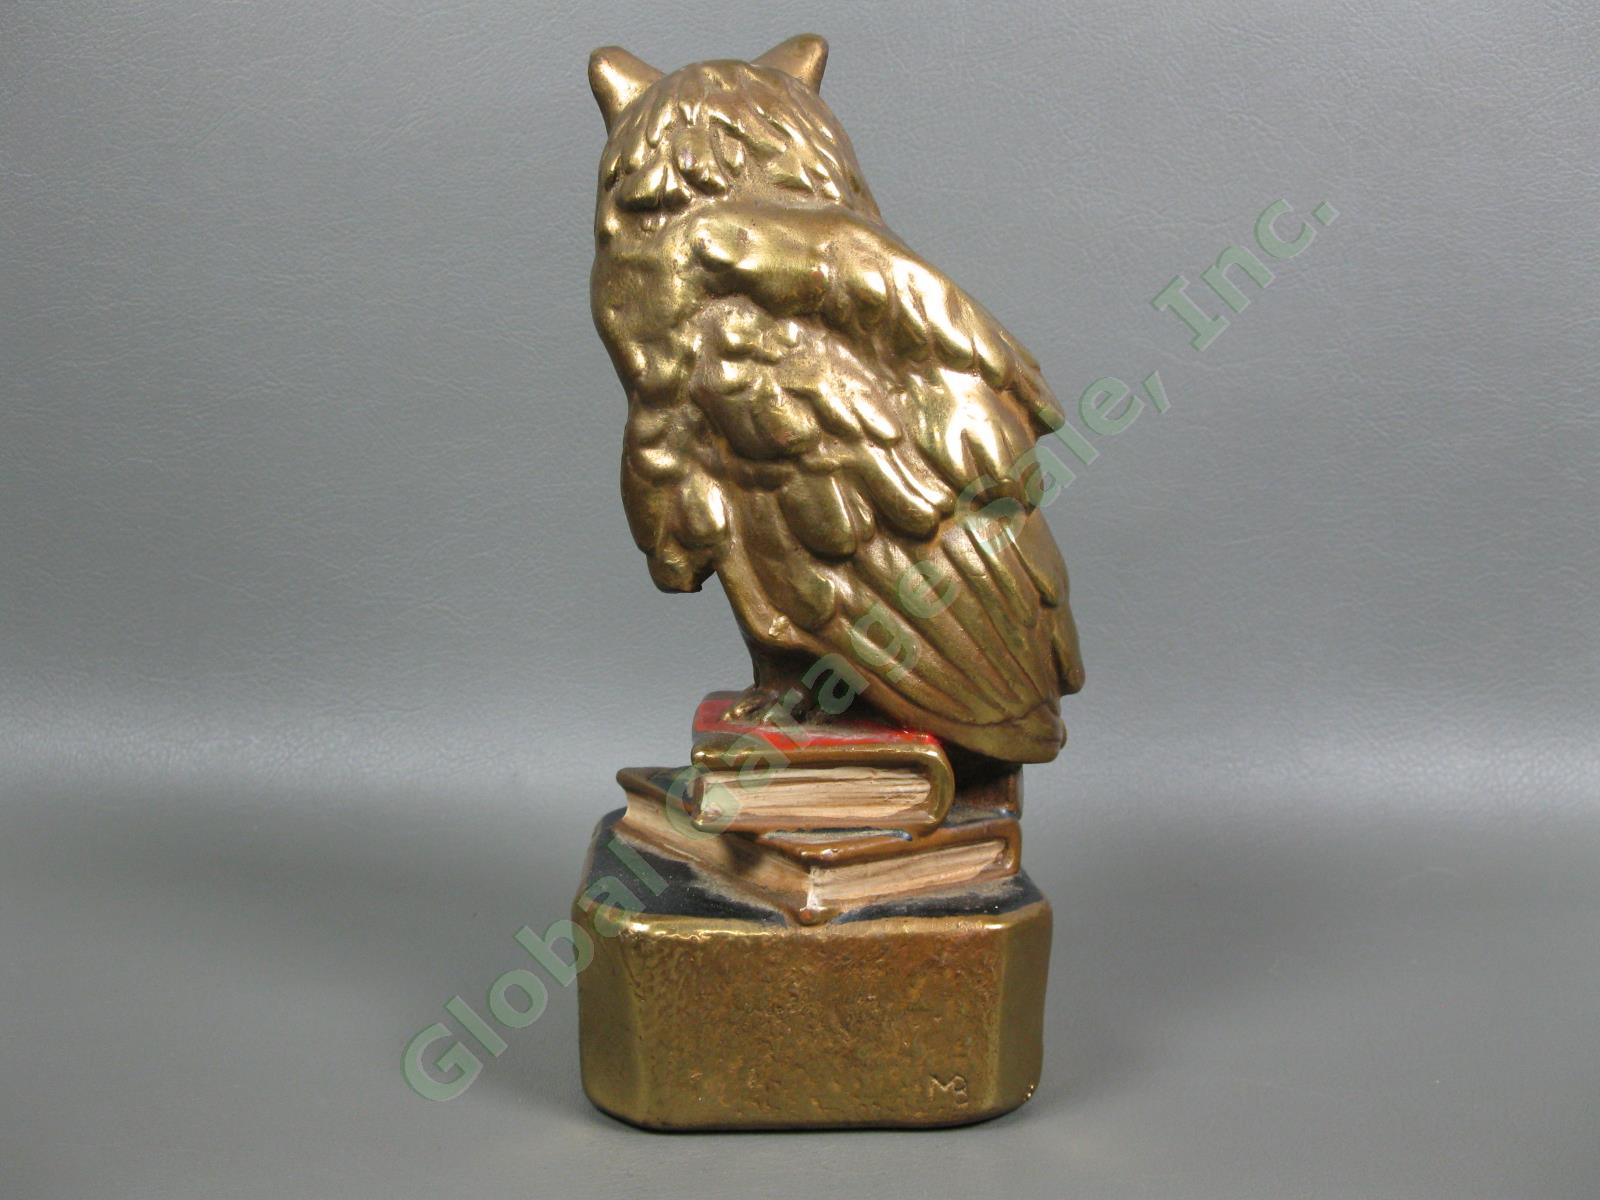 Original Antique 1930s Marion Bronze Owl Paperweight Statue Bookend Gold Painted 1